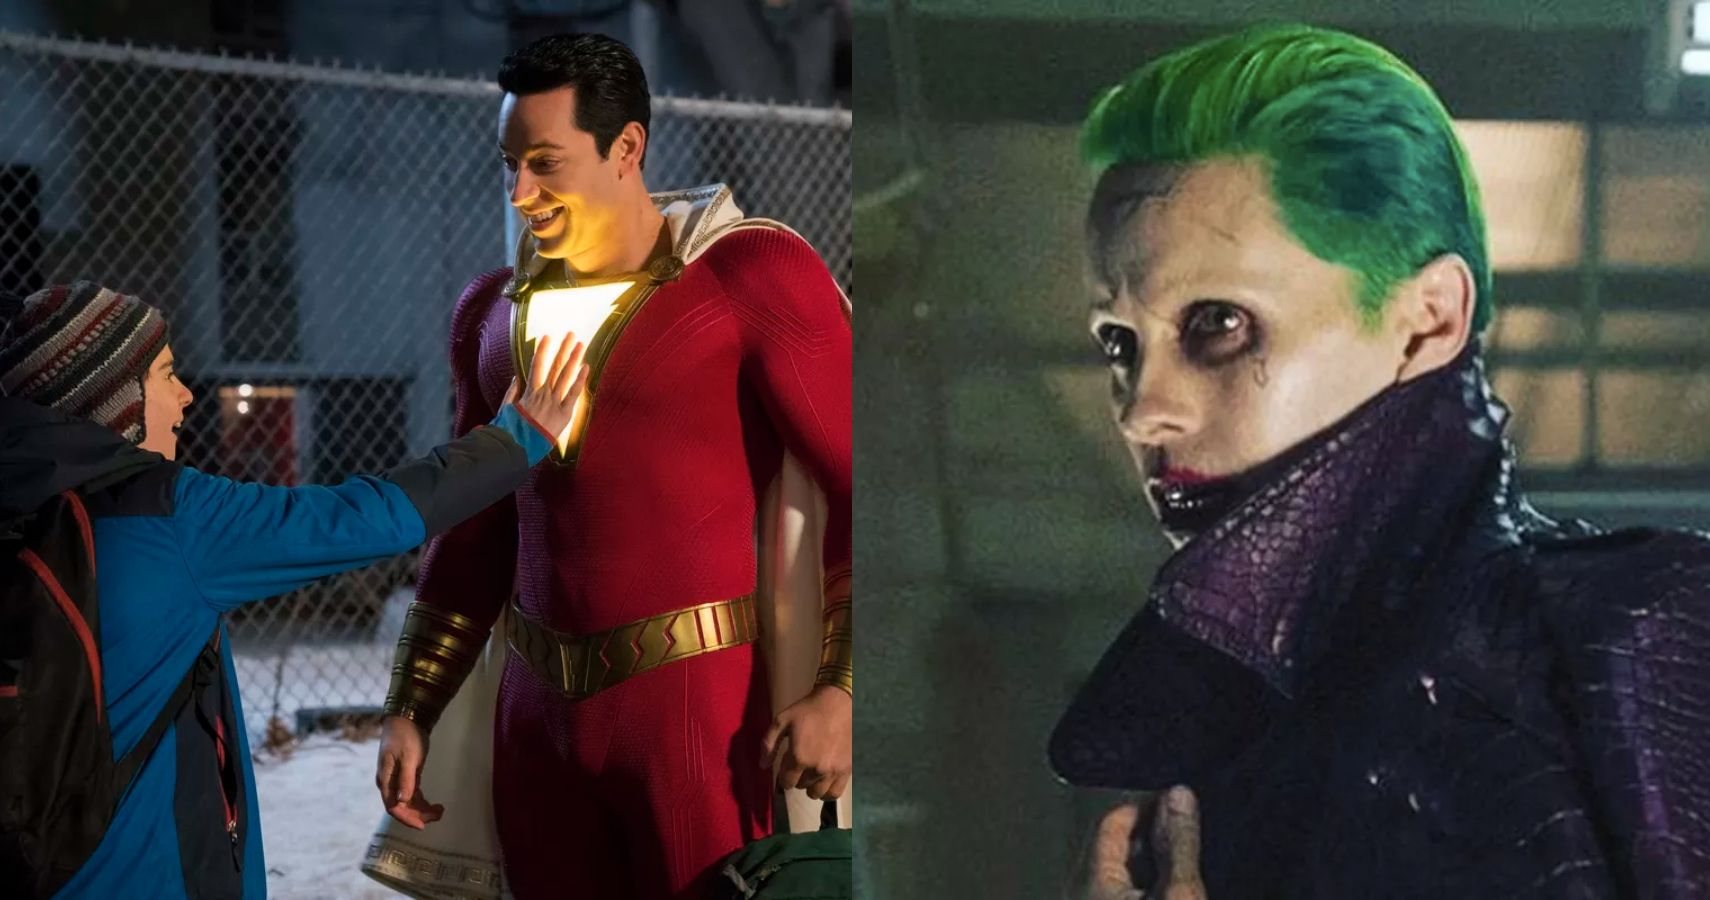 10 Hidden Details About The DCEU Costumes You Didn’t Notice